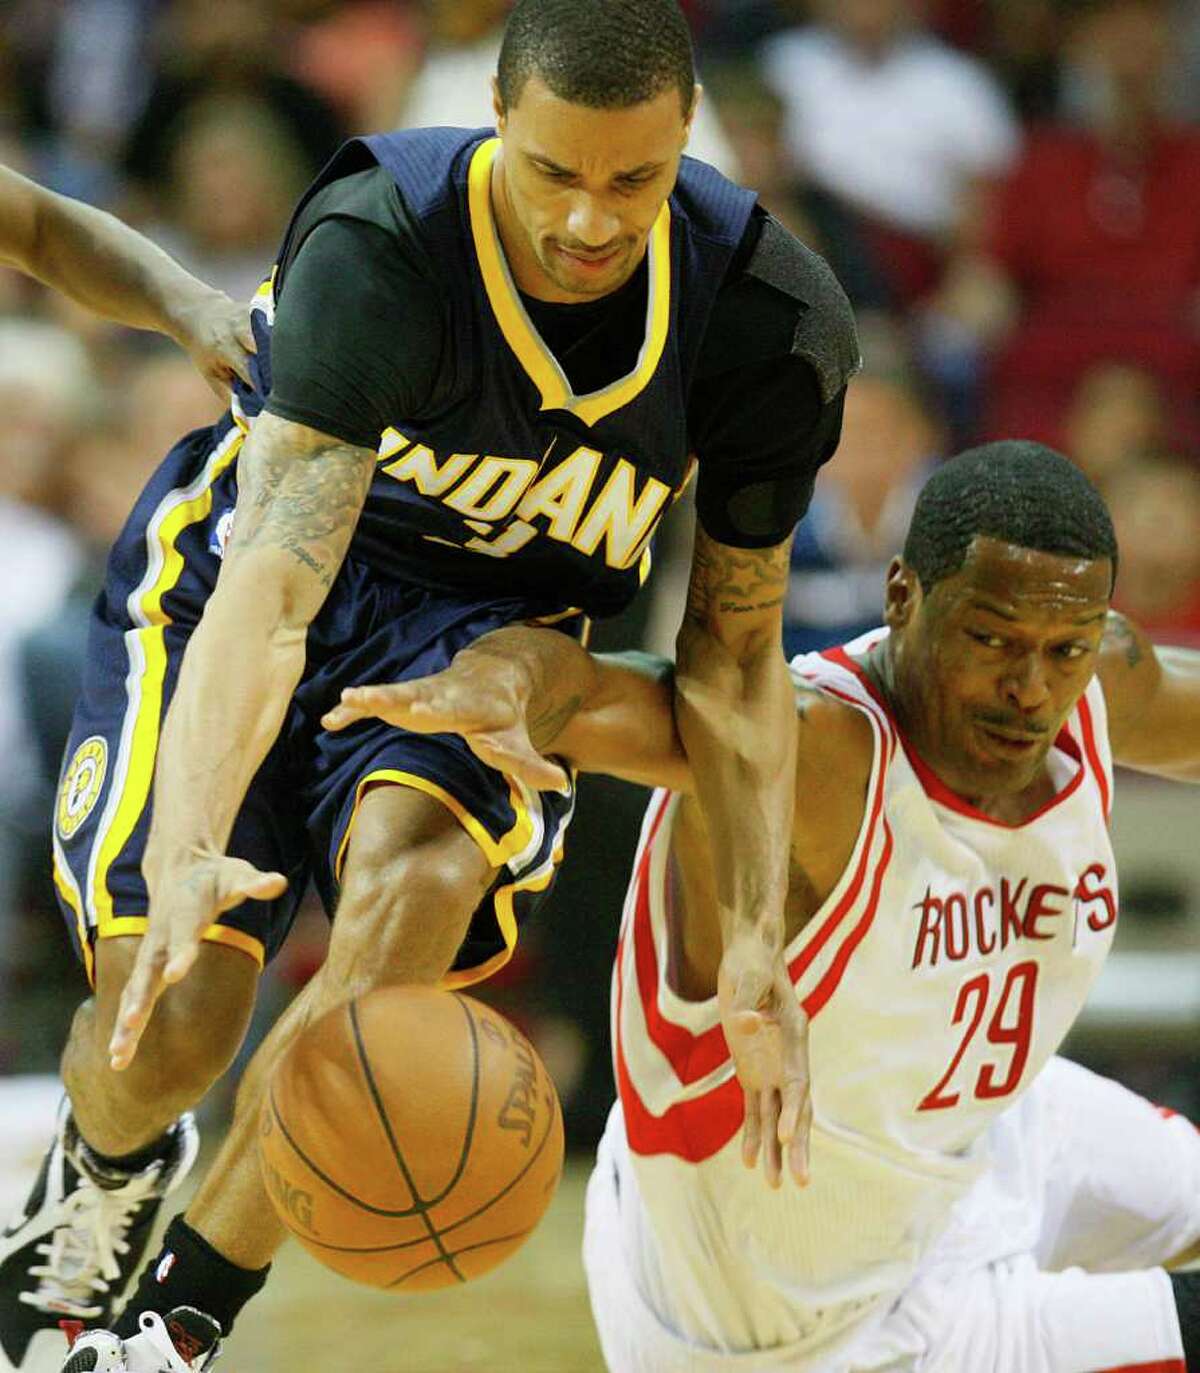 Akin to this steal by George Hill, left, against Marcus Camby, a win slipped away from the Rockets.